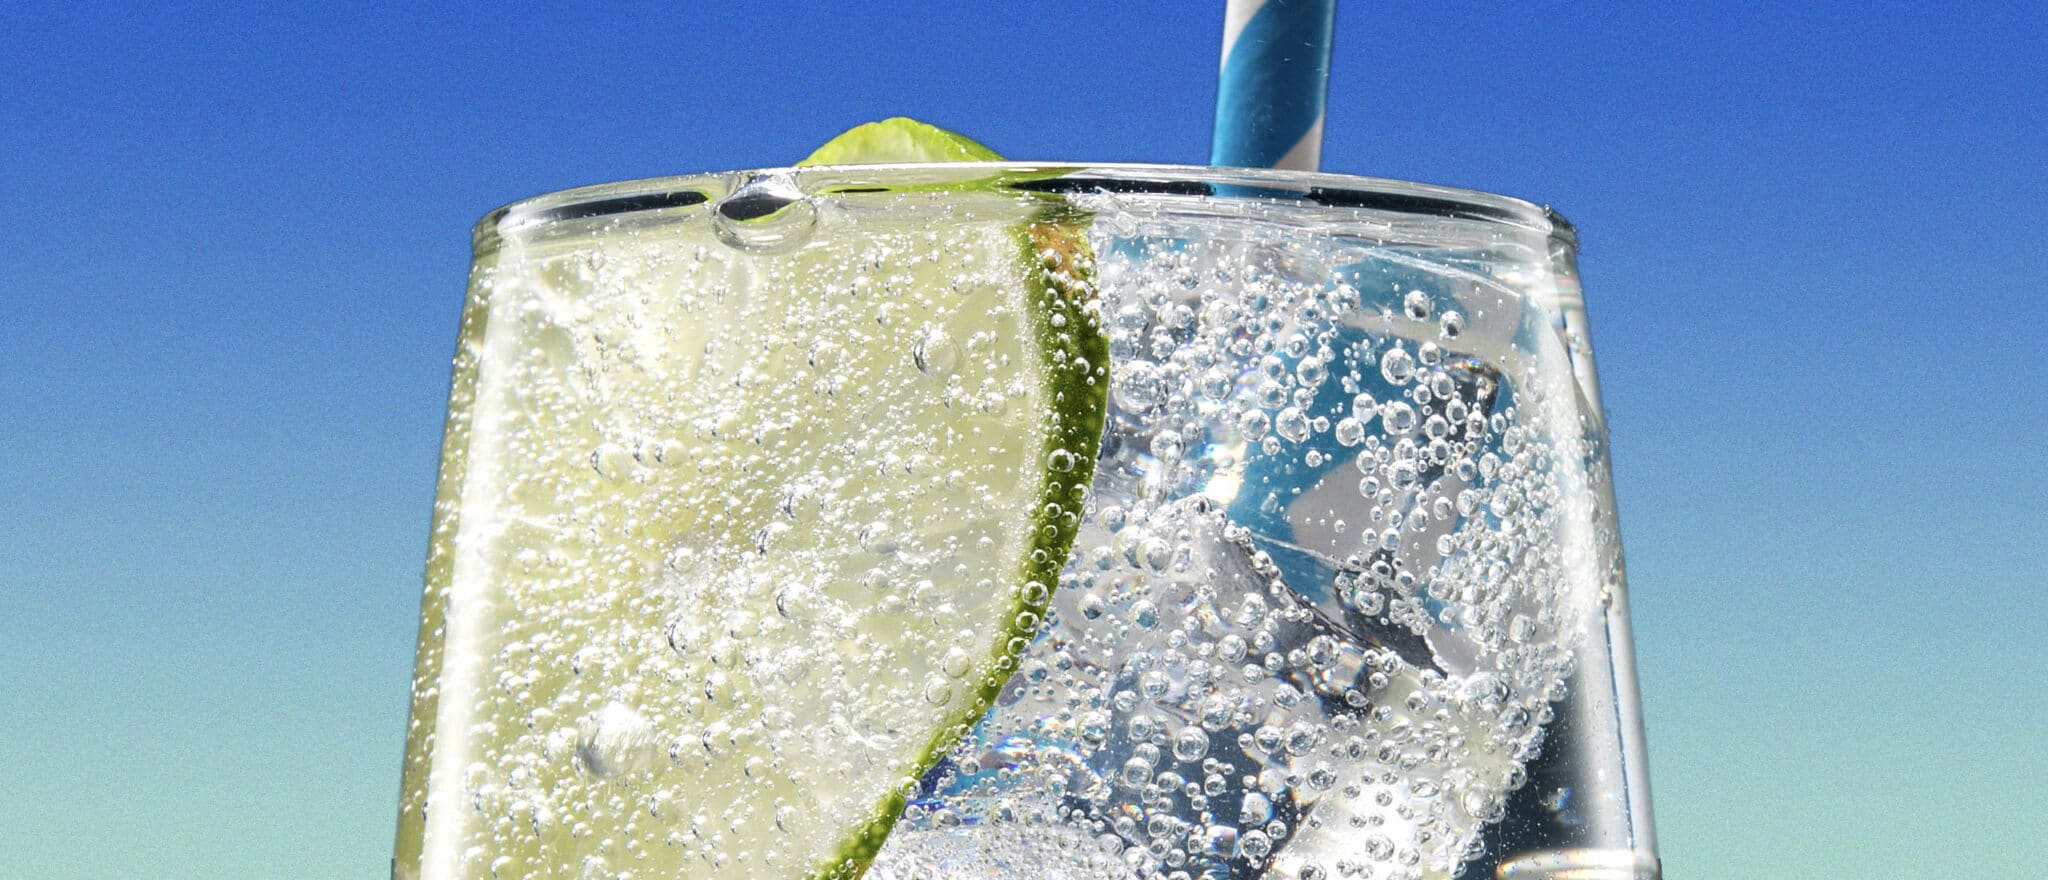 Are There PFAS in Sparkling Water?